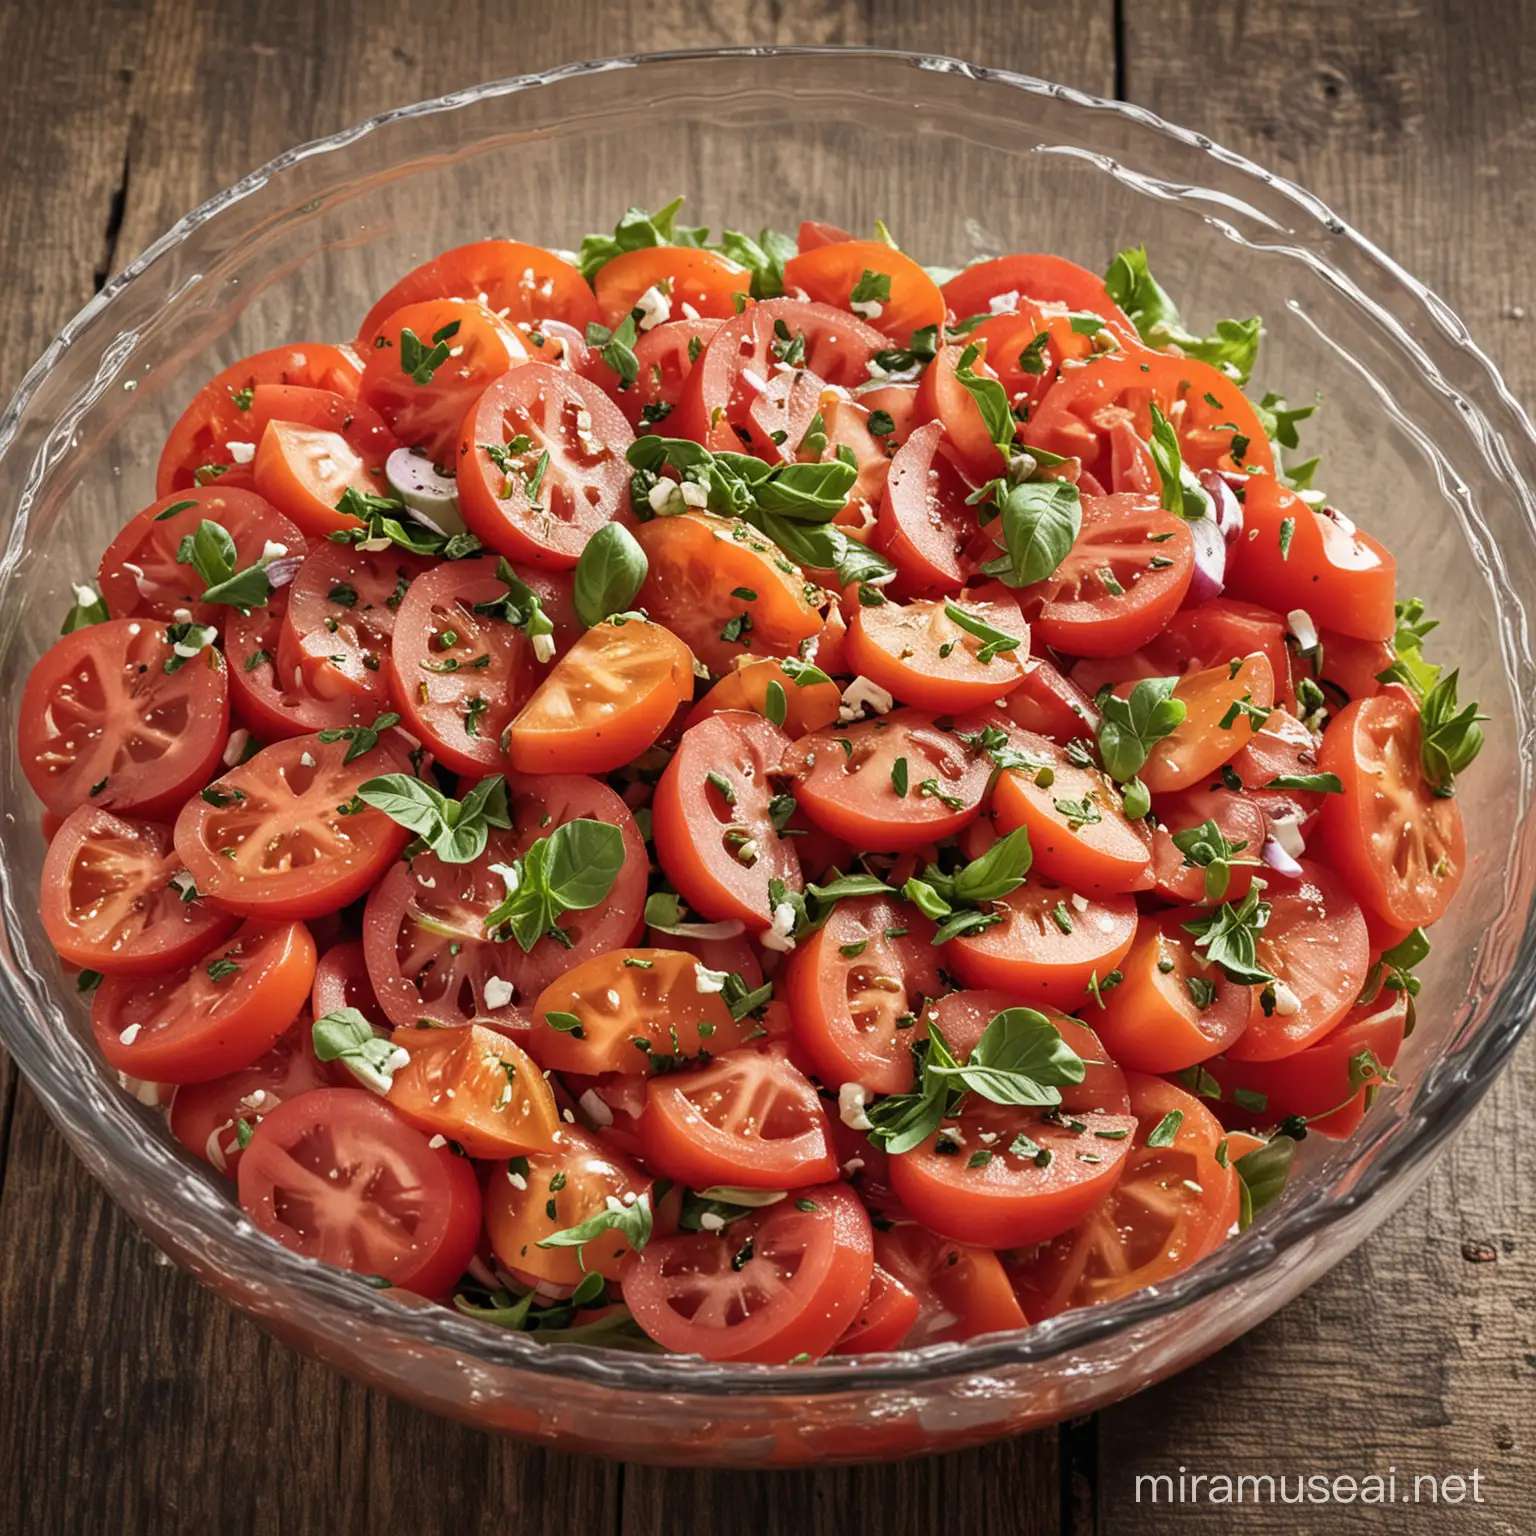 Vibrant Tomato Salad with Fresh Greens and Zesty Dressing